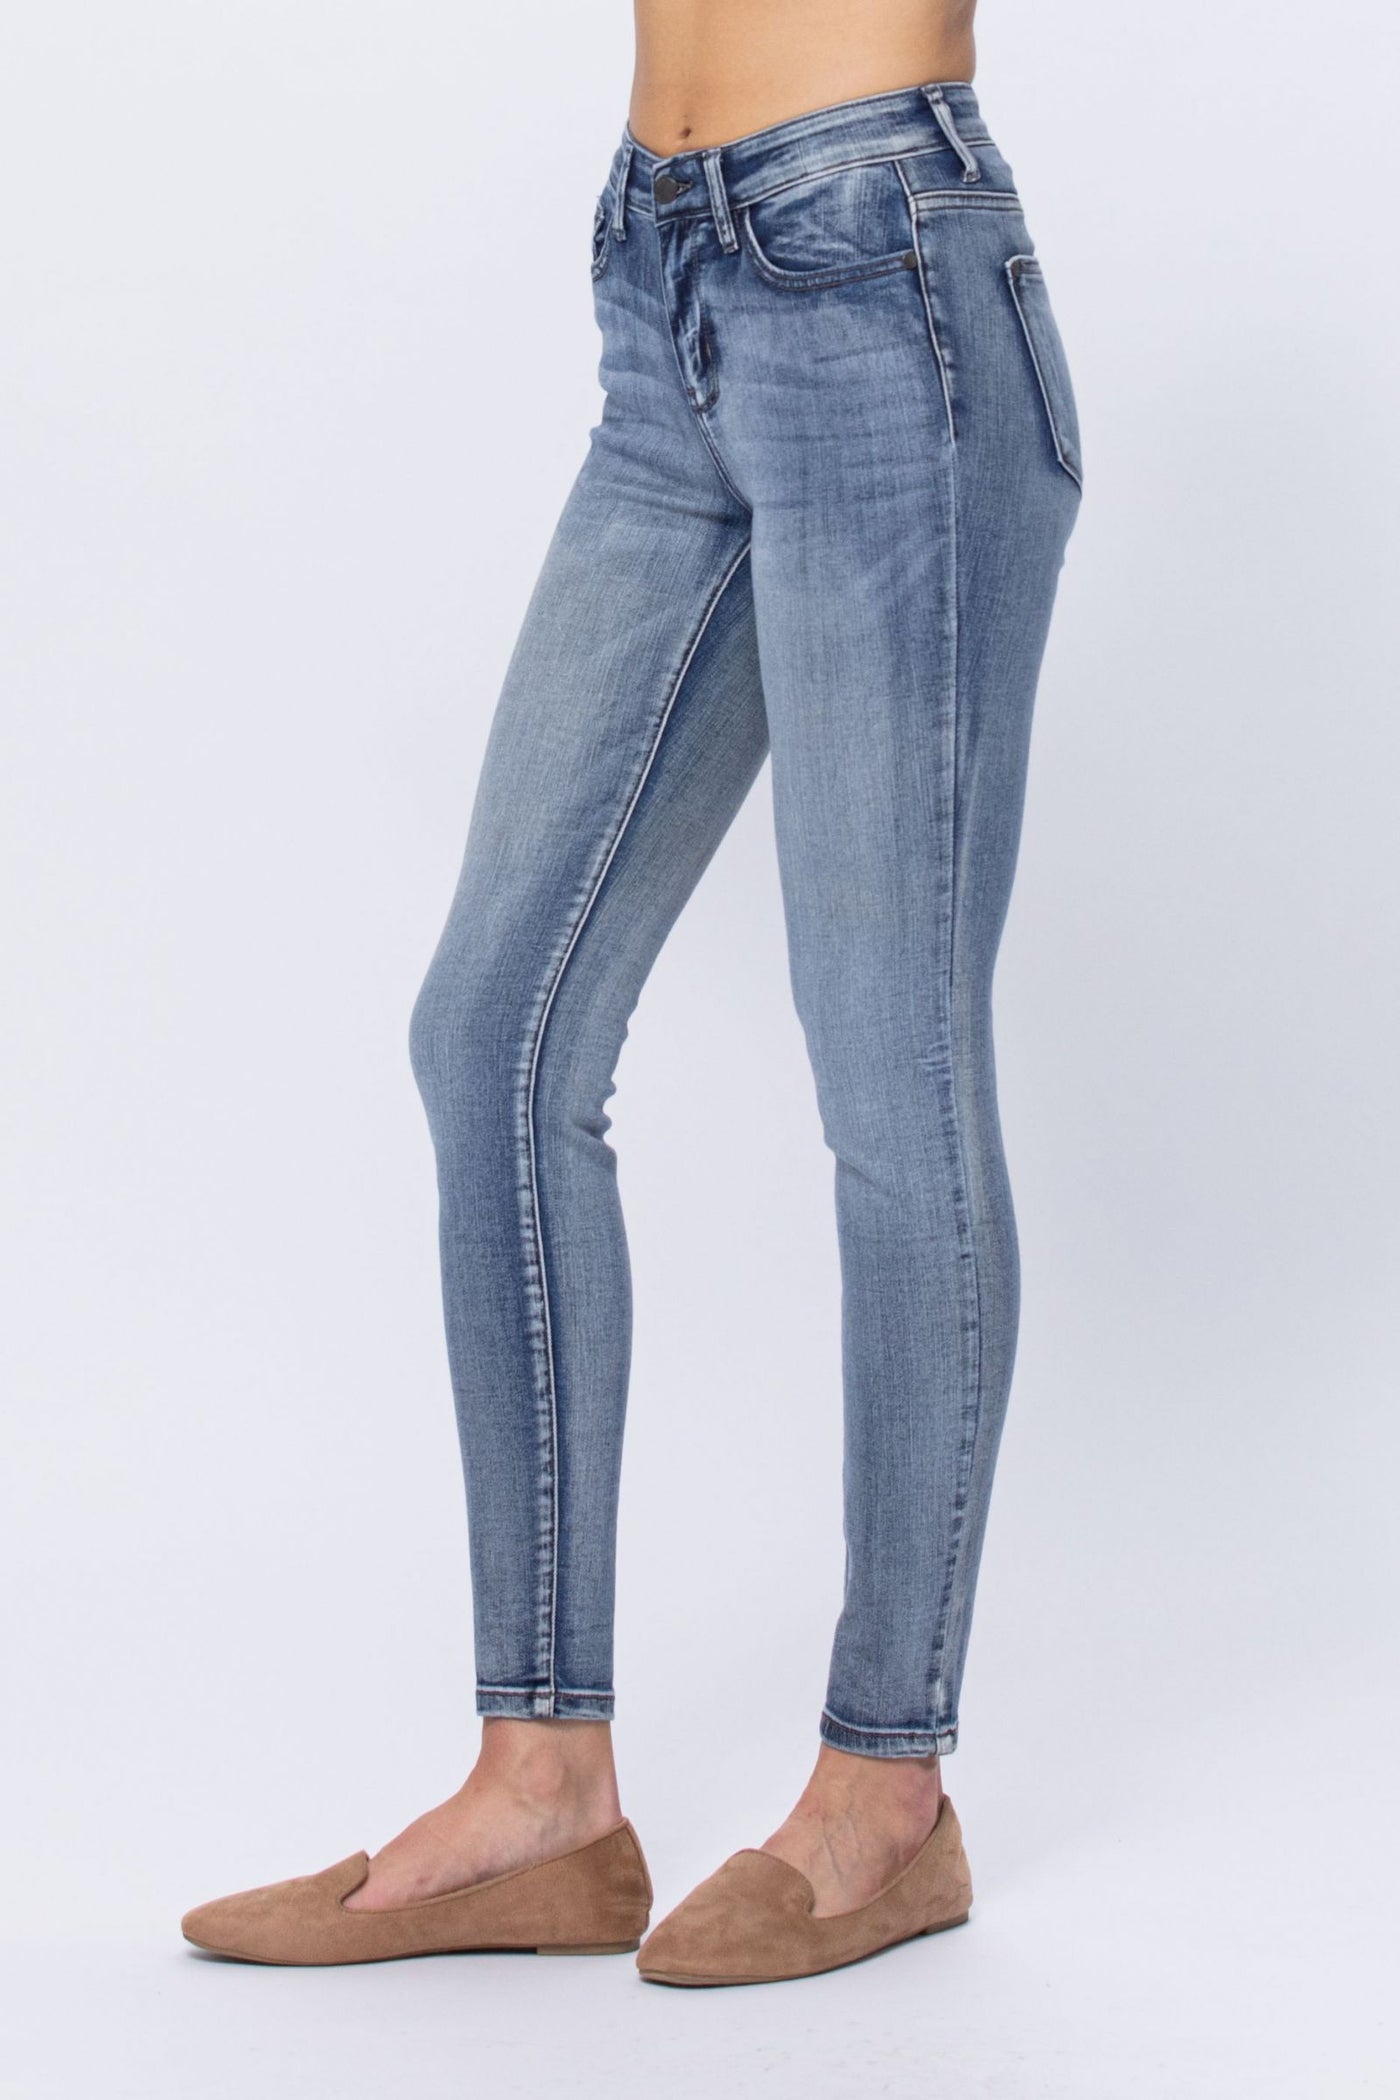 Judy Blue High Rise Skinny - Corinne Boutique Family Owned and Operated USA